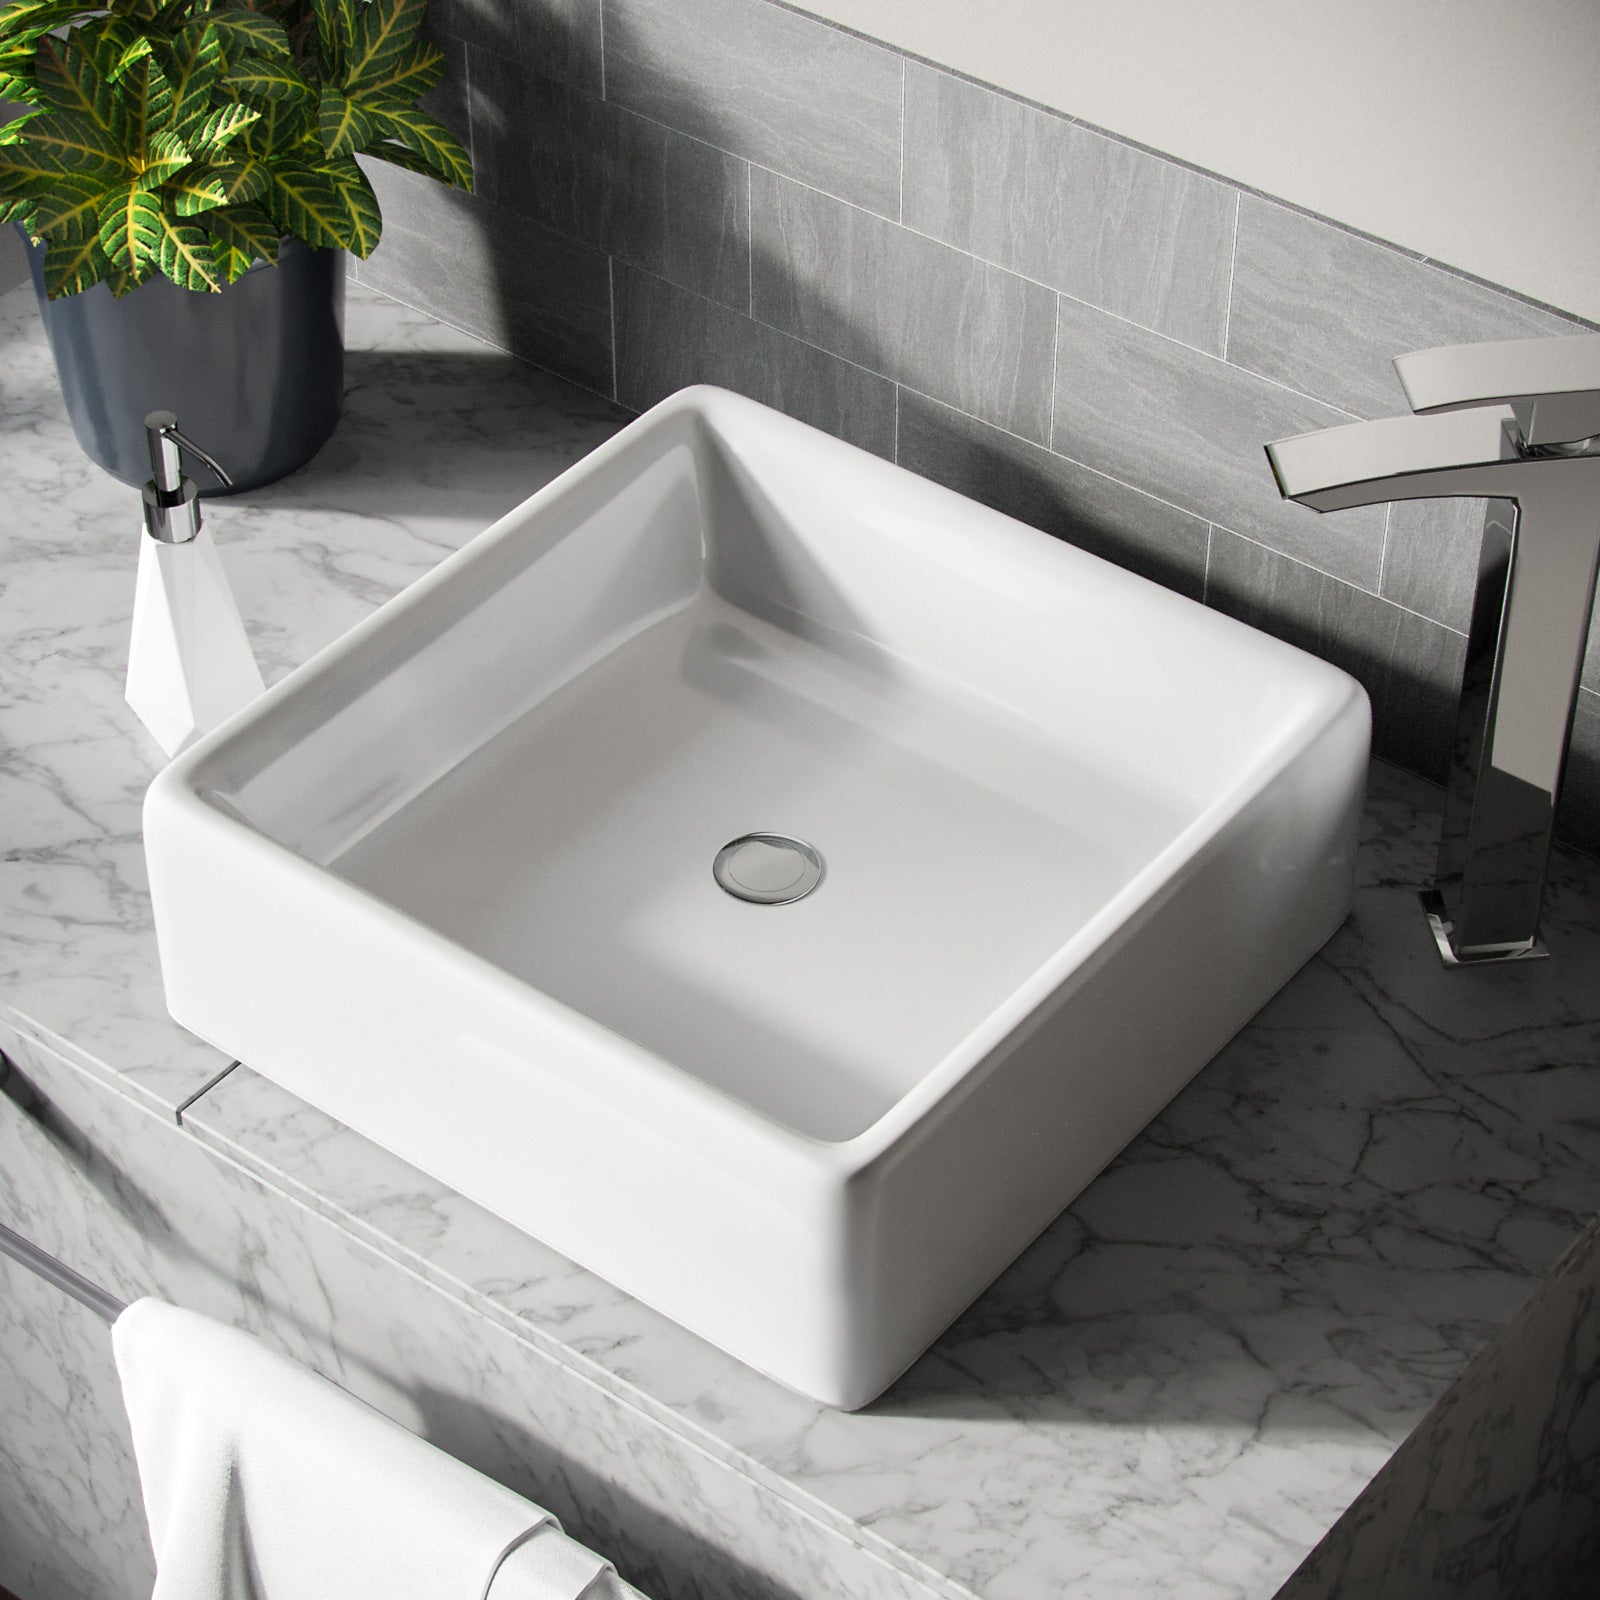 Leven 385 X 385mm Cloakroom Square Stand Alone Counter Top Basin Sink